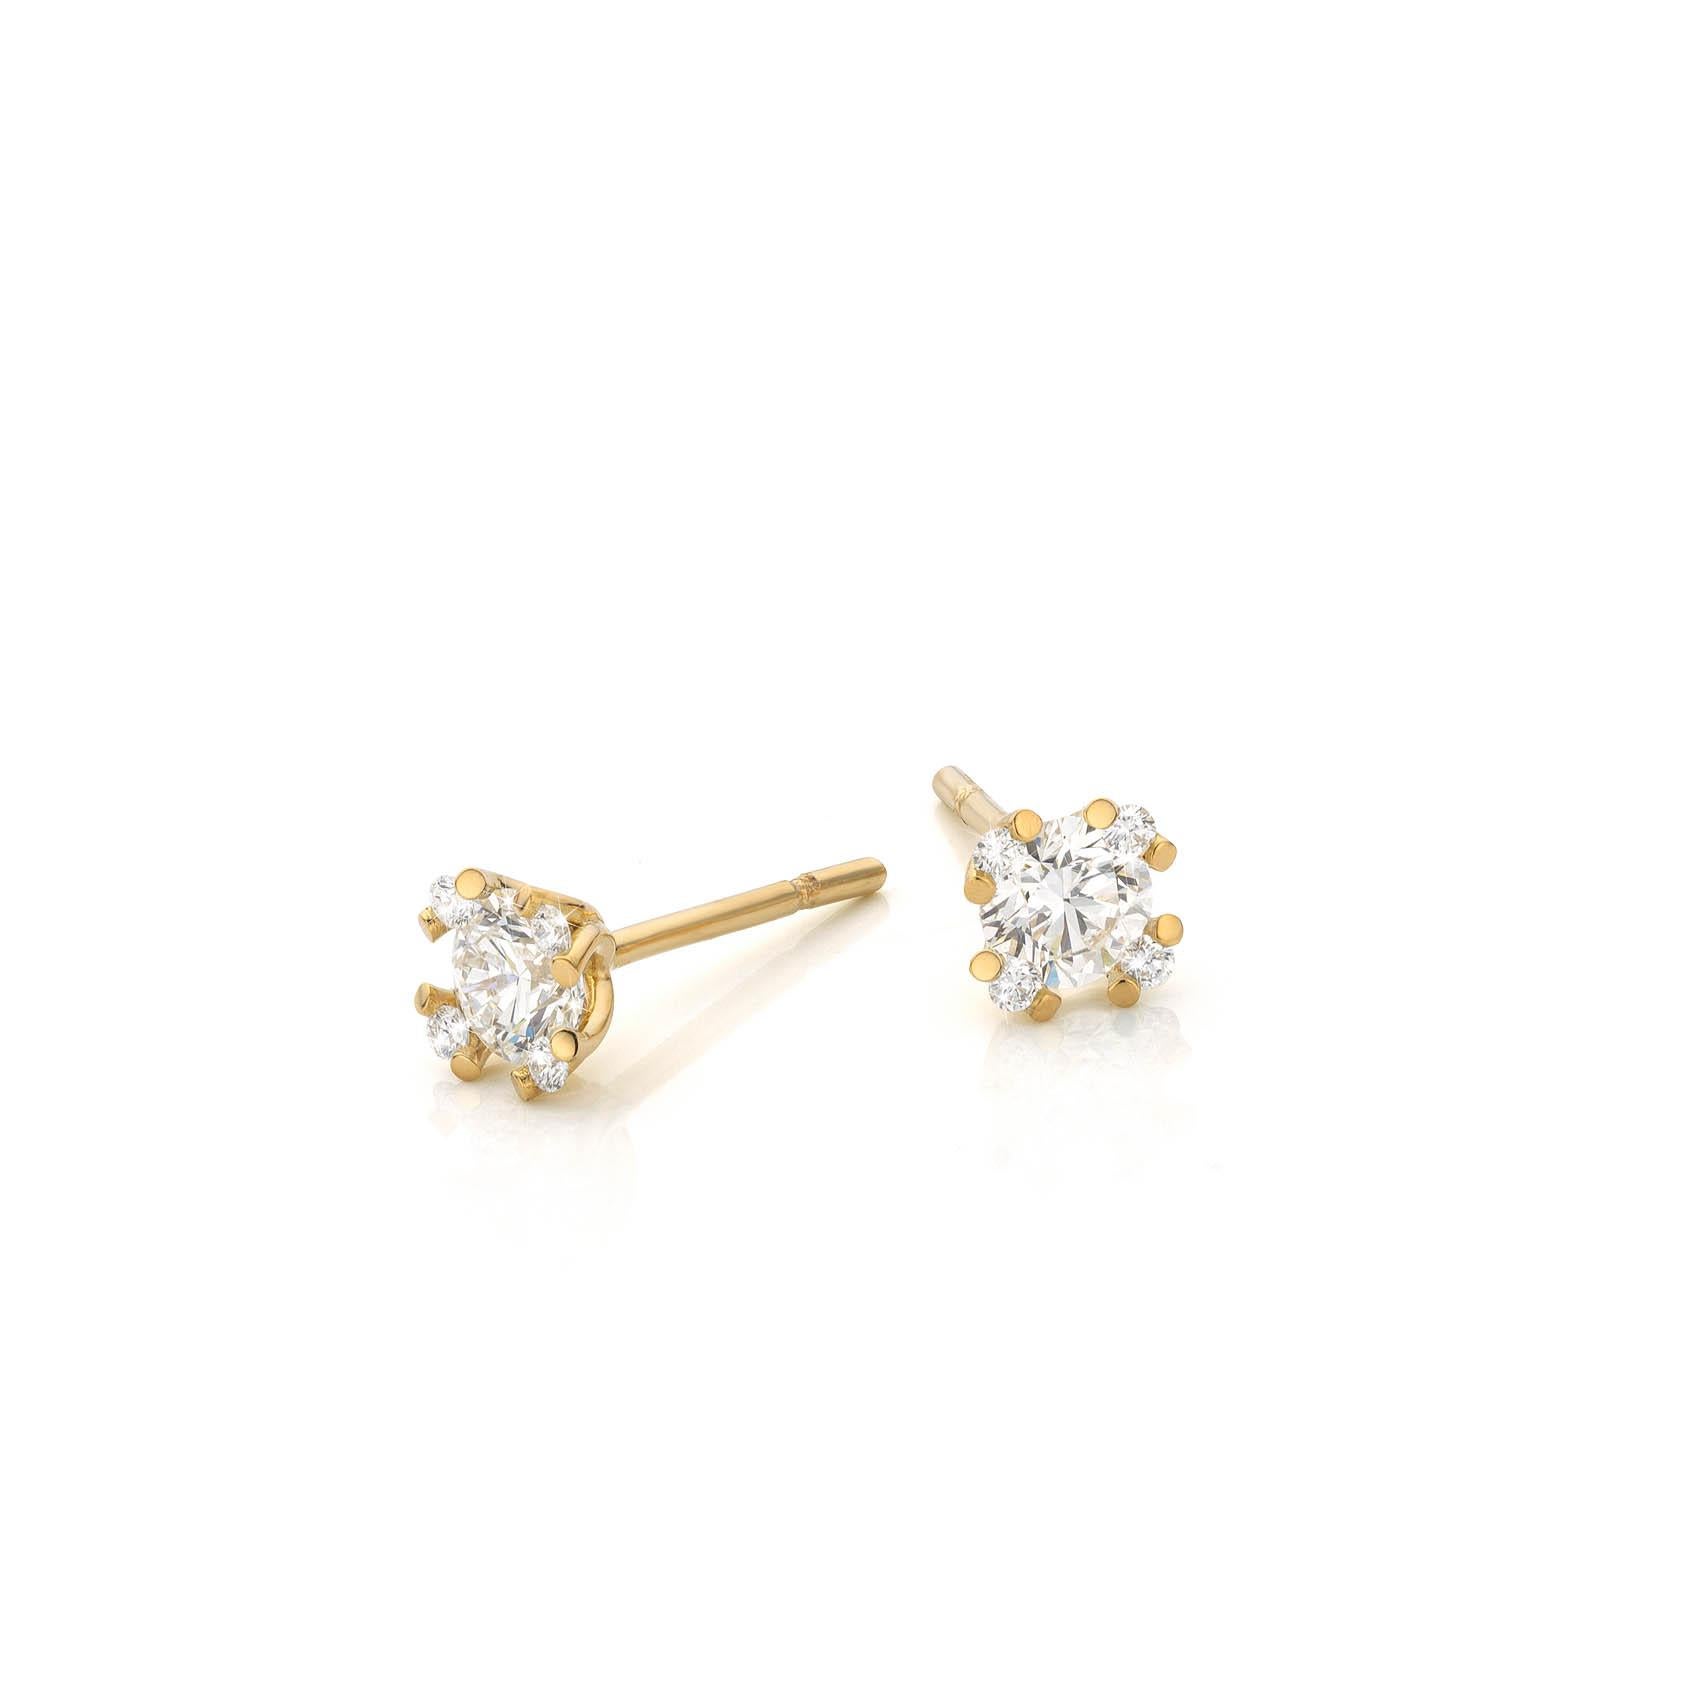 Contemporary Cober “Dancing with the stars” with central 0.34 Ct Diamond Stud Earrings For Sale